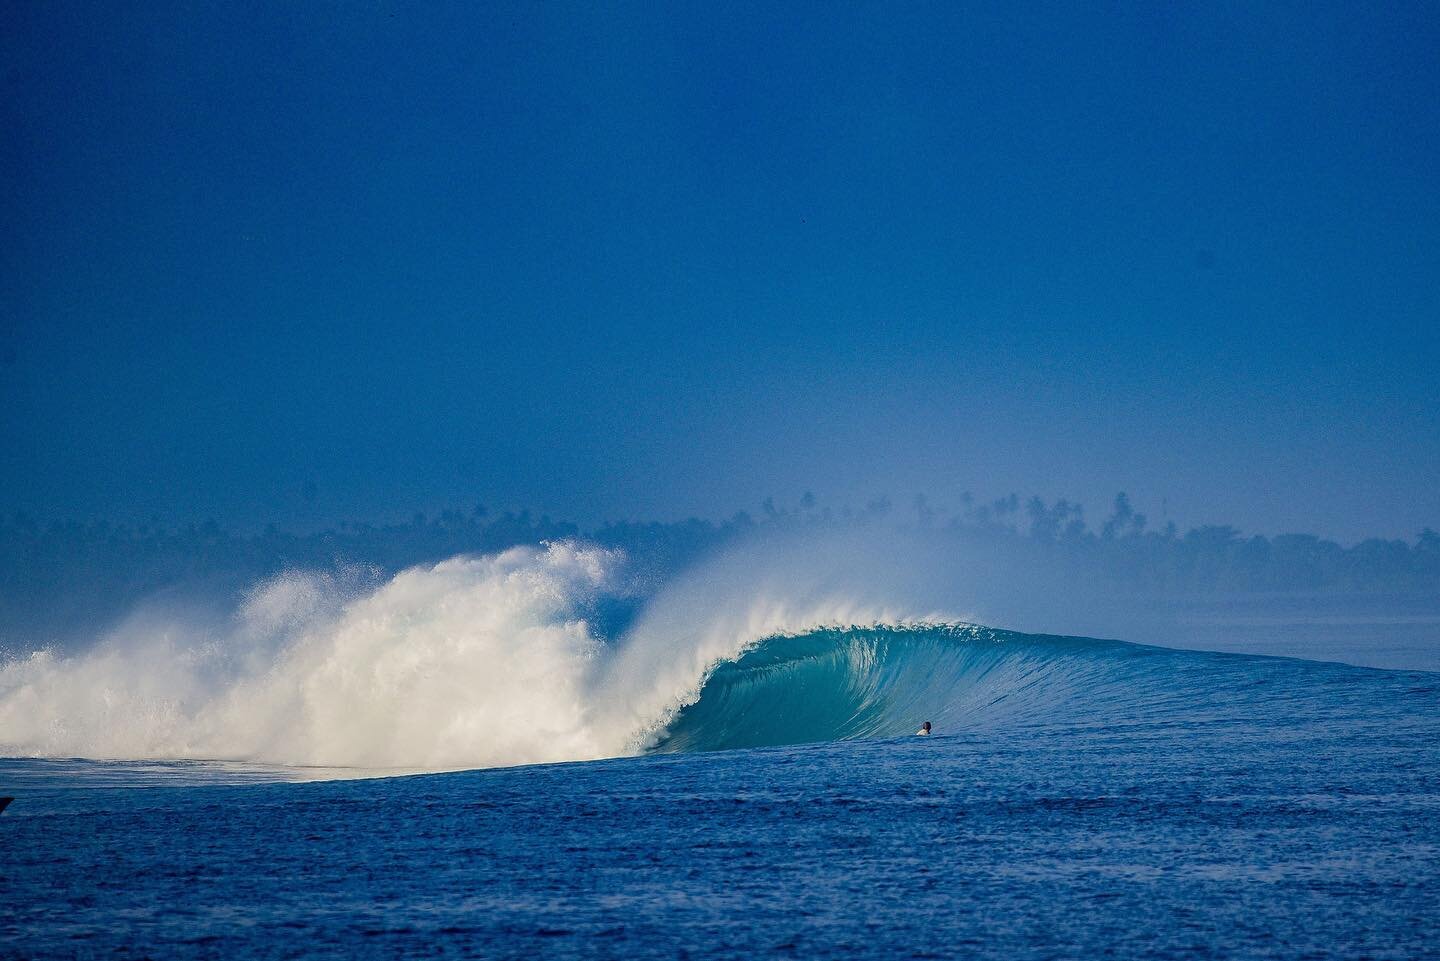 Waking up to Mentawai gold, how good! Check our site to see more shots!
#switchfootmentawai 

Pic @byronwaves